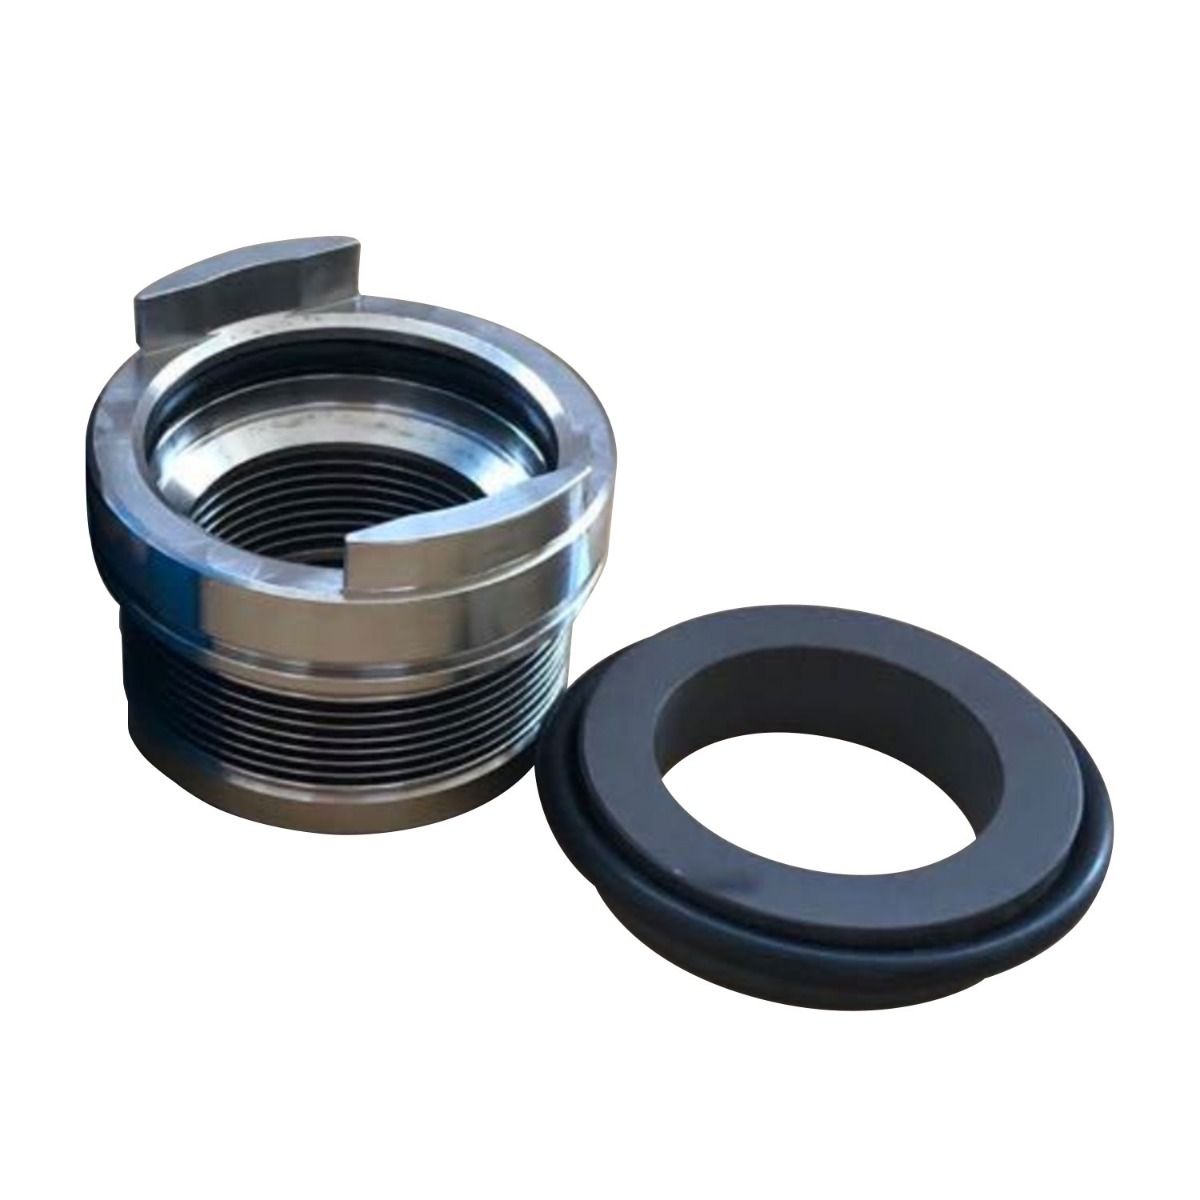 Large Shaft Compressor Seal Replacement 22-1101 for Thermo King X-430 